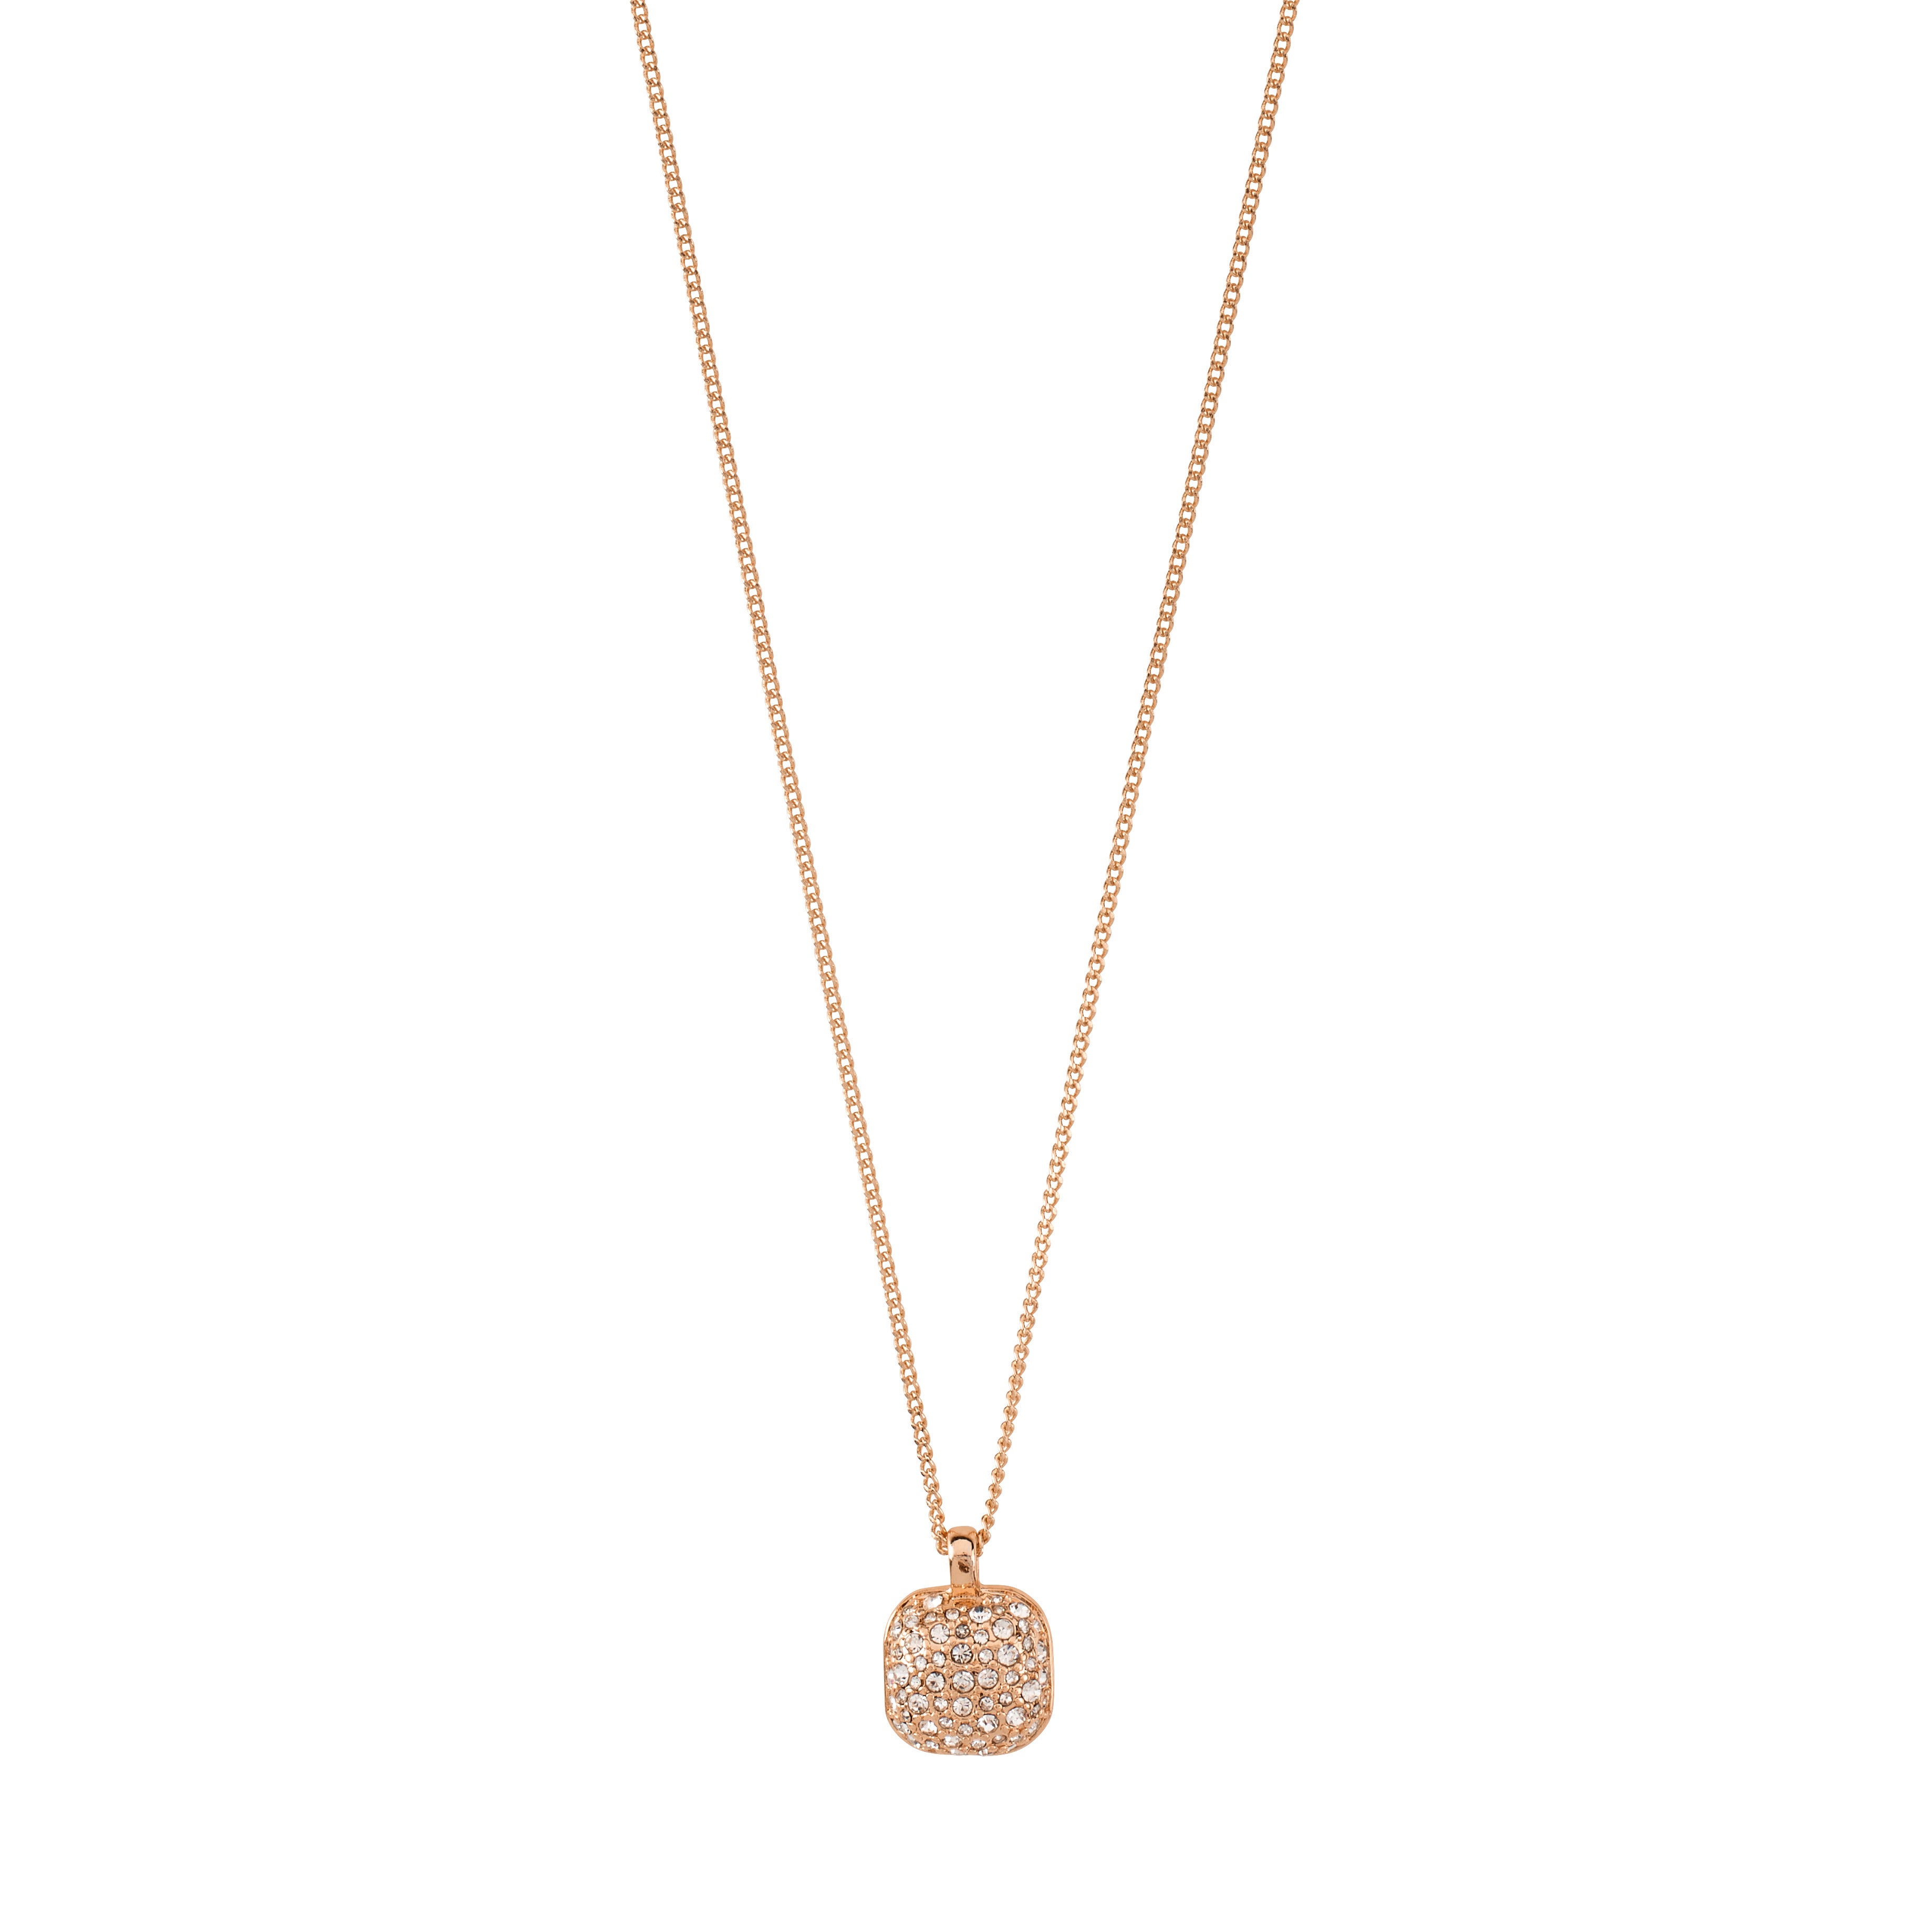 CINDY recycled crystal pendant necklace rosegold-plated